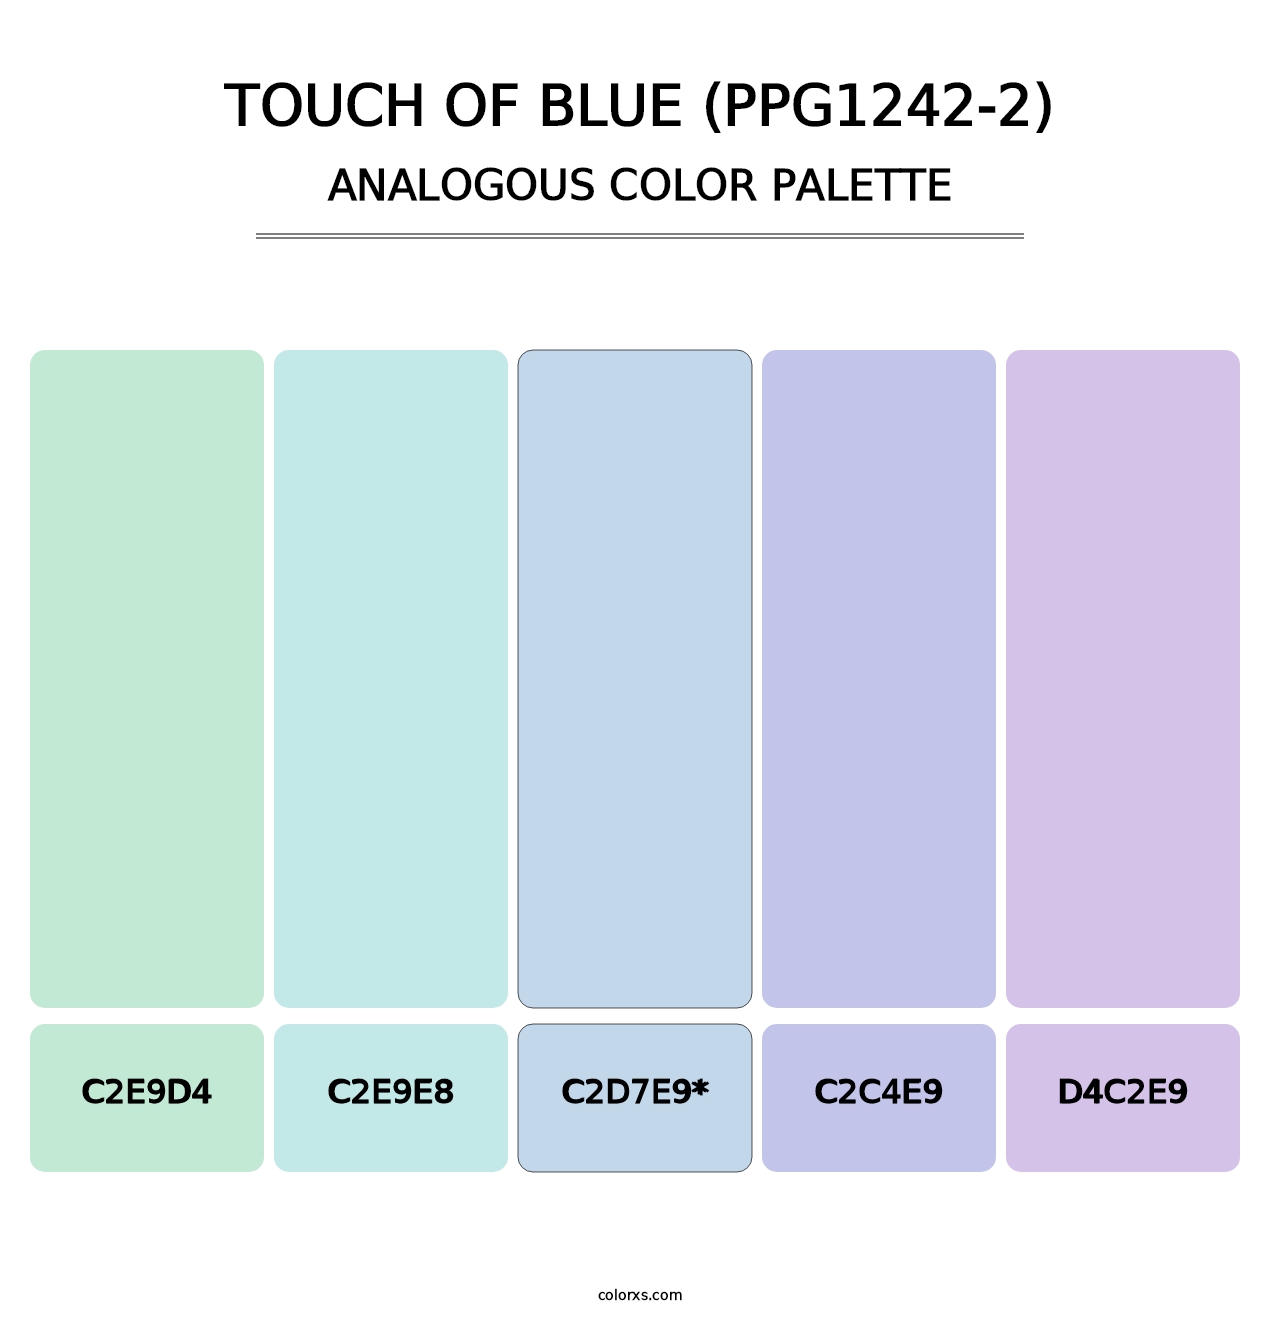 Touch Of Blue (PPG1242-2) - Analogous Color Palette